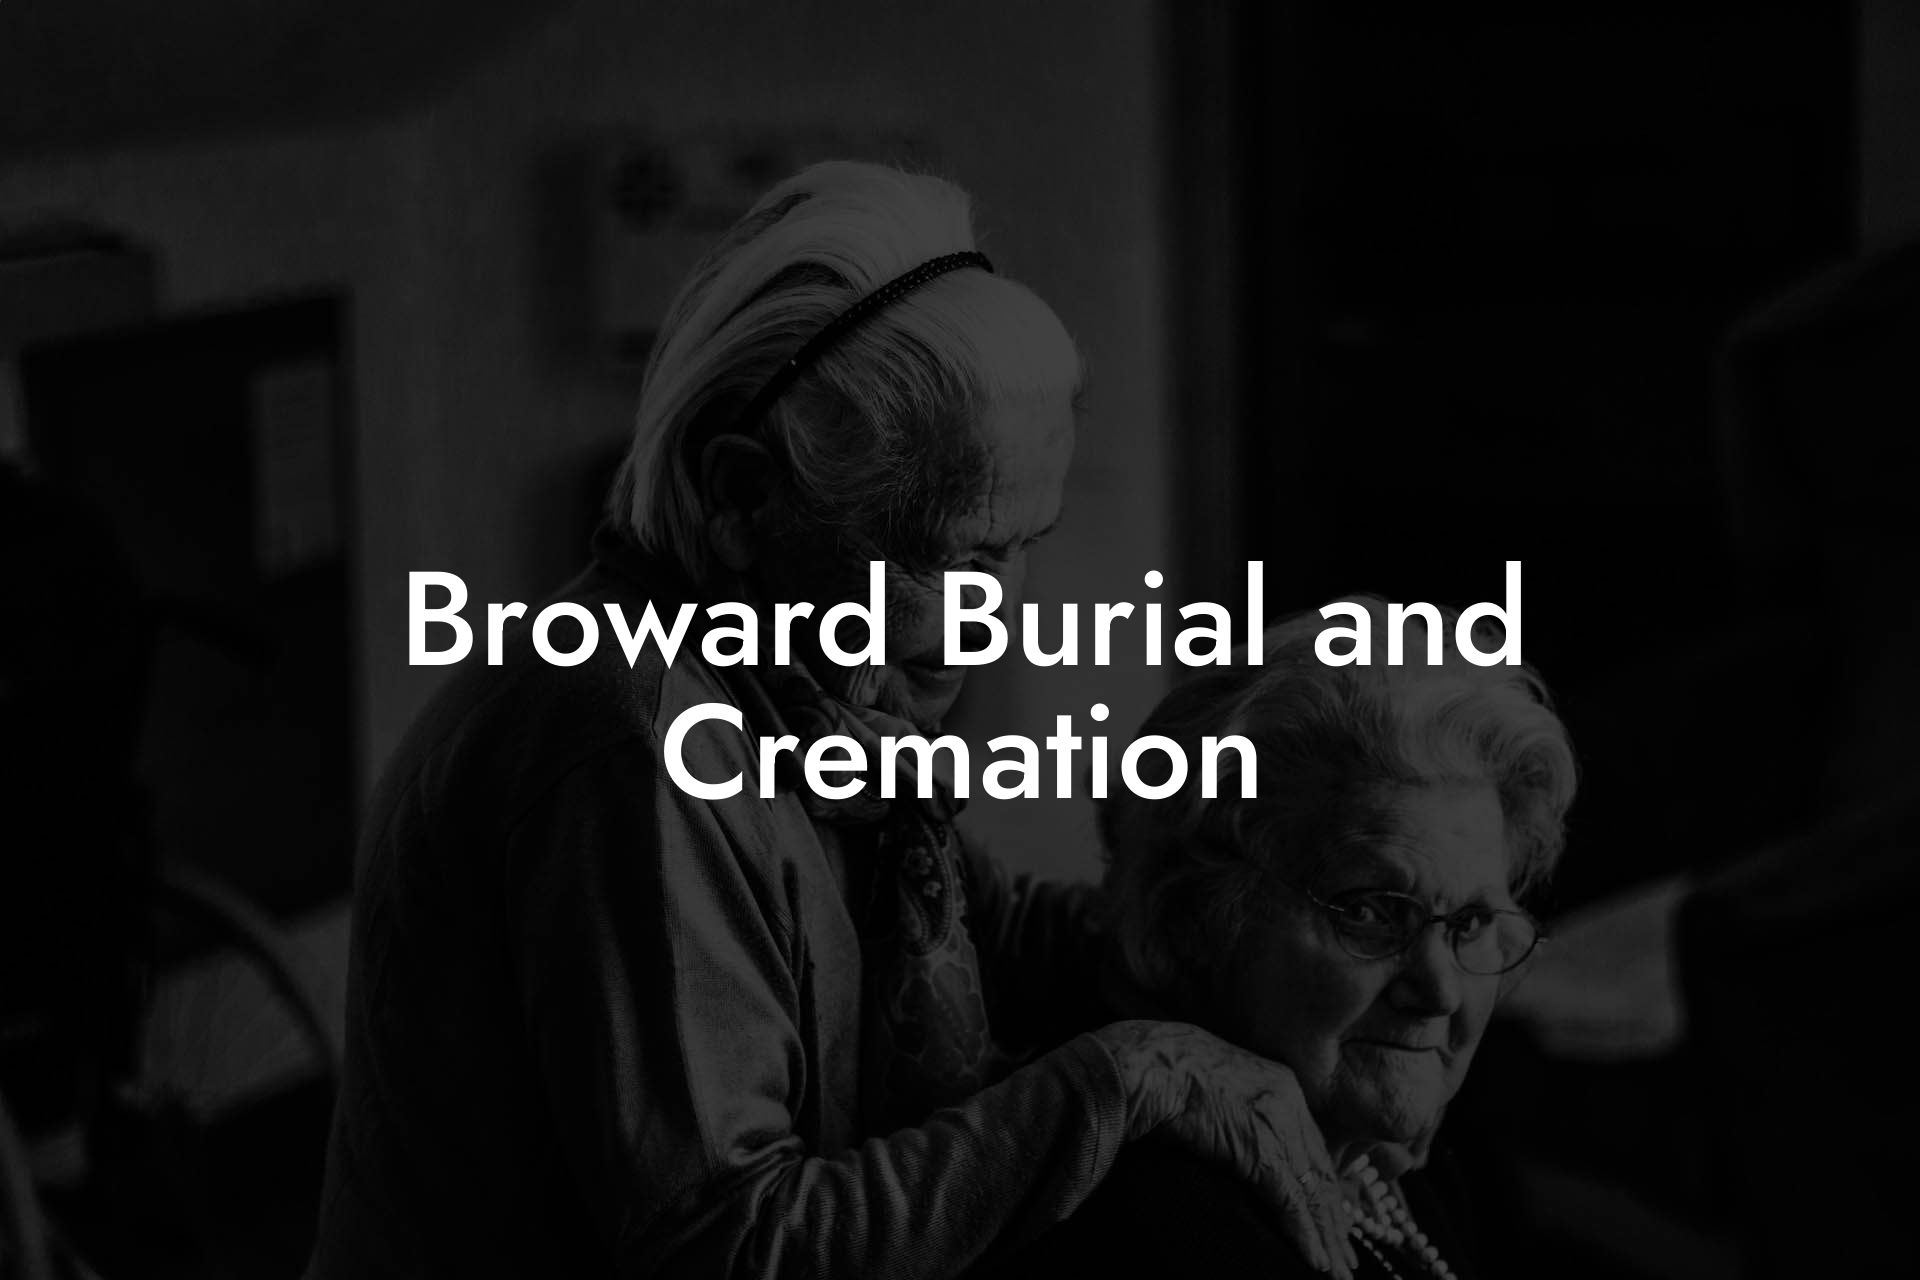 Broward Burial and Cremation